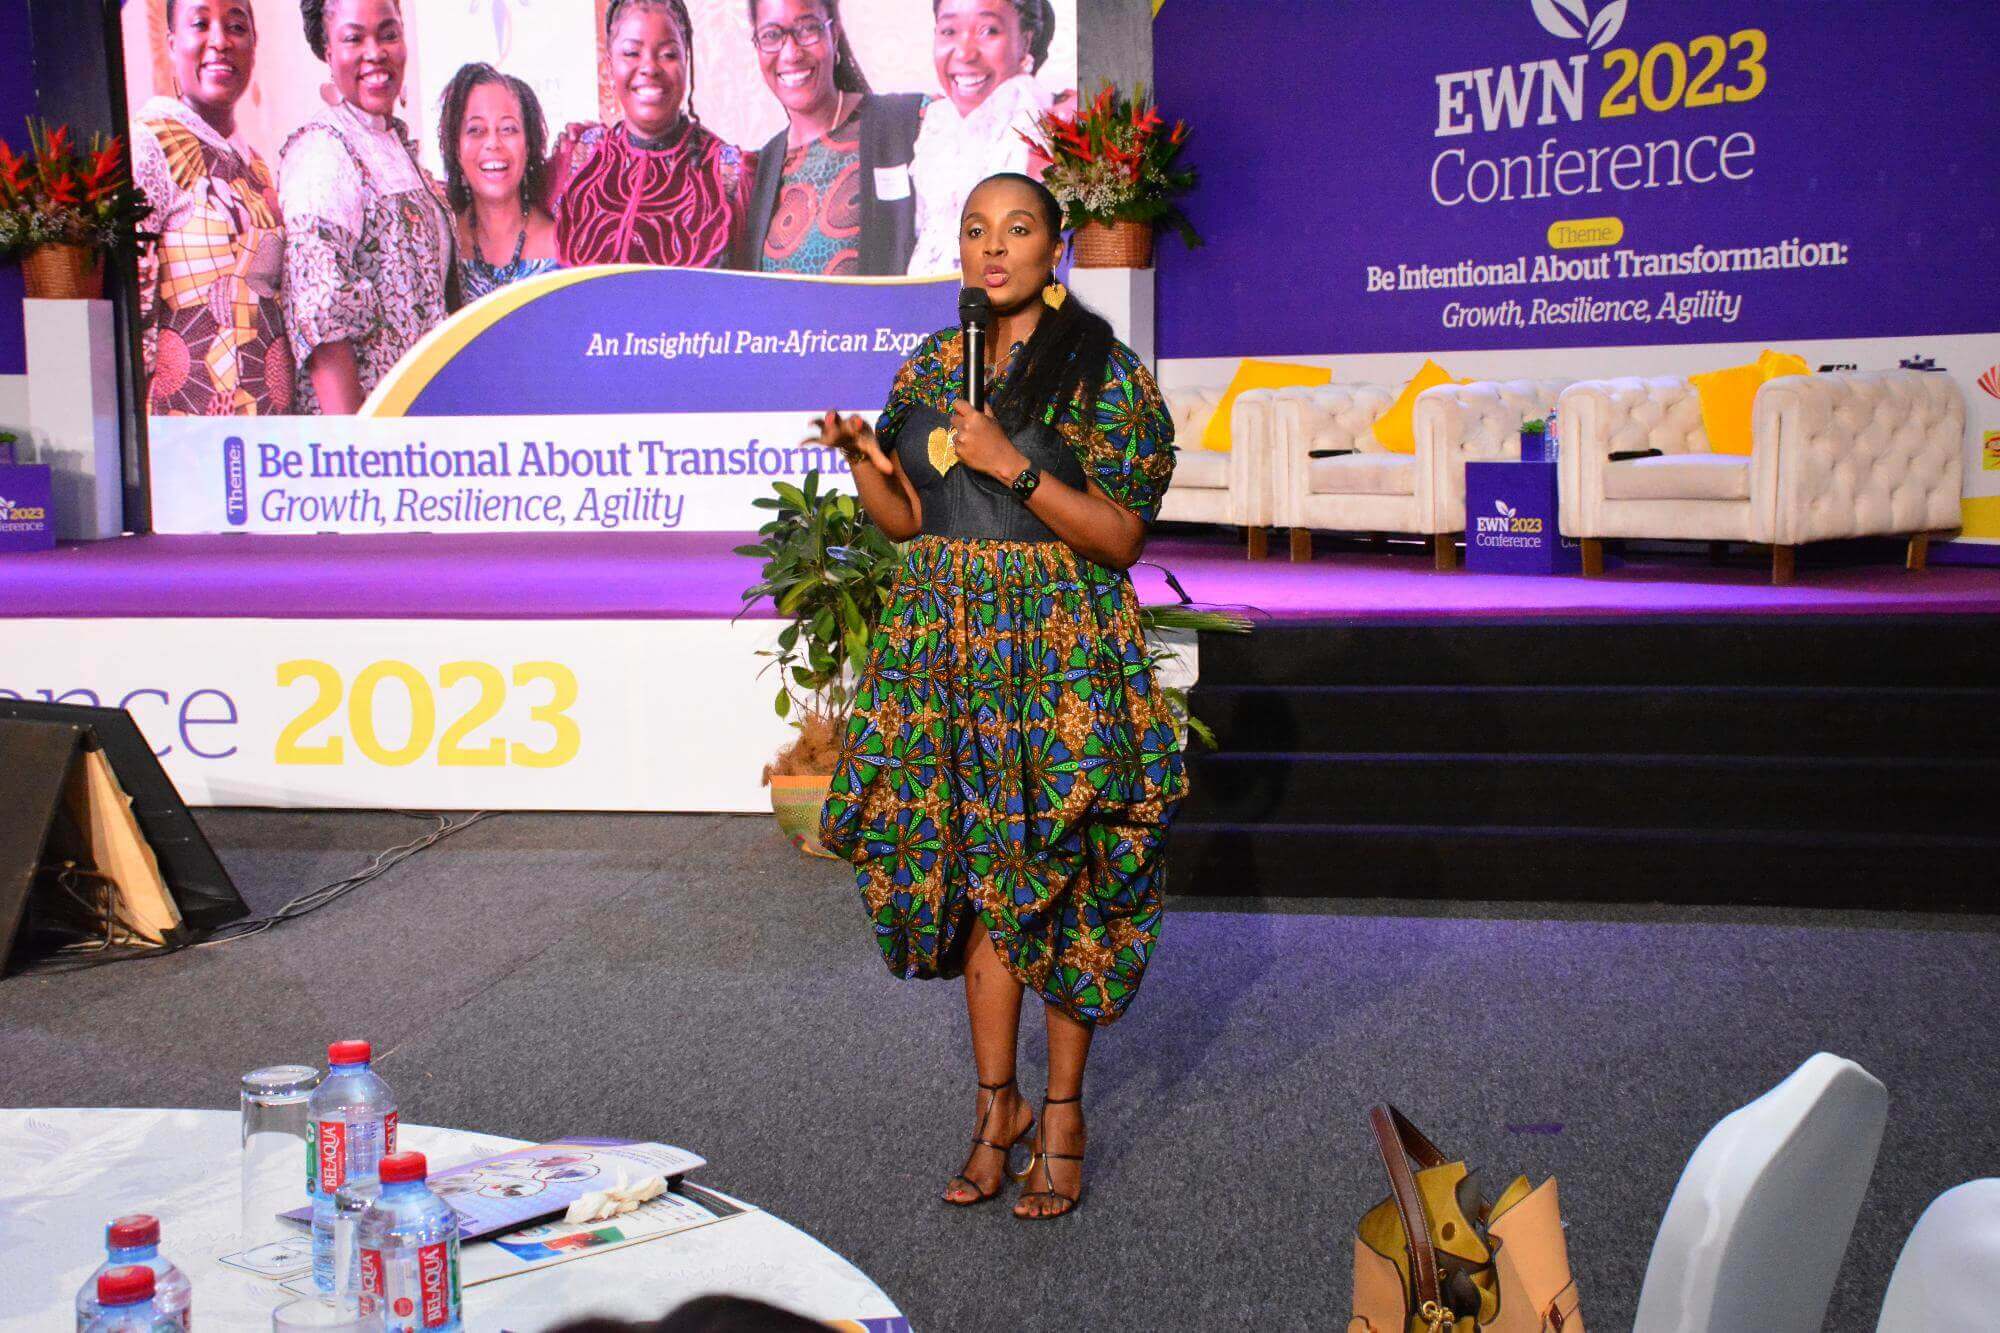 ‘Create Opportunities for Young Girls and Women in STEM’ - Antoinette Kwofie, MTN CFO